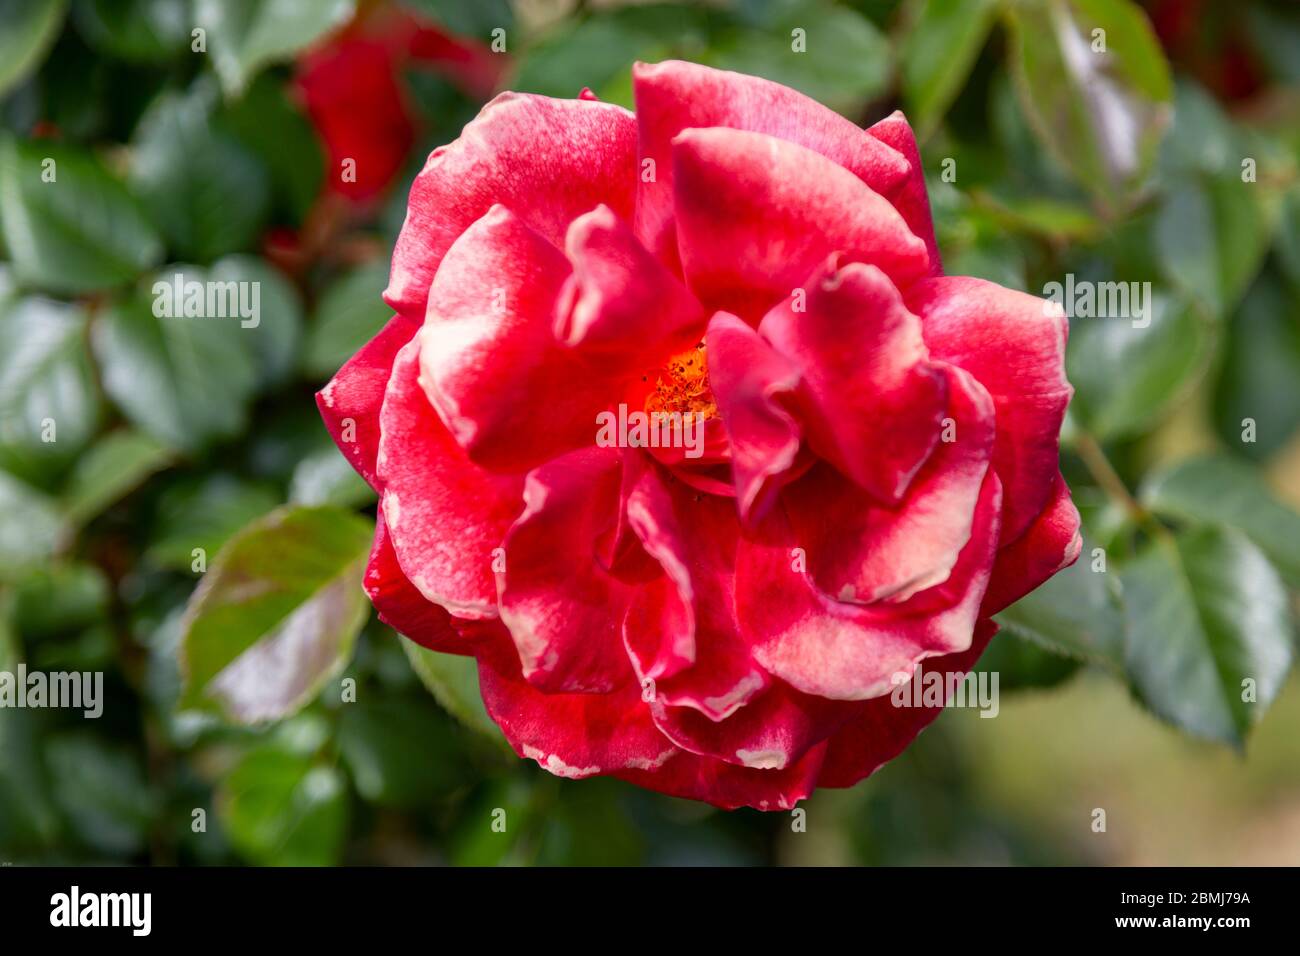 A closeup macro photo of a  single red and white bi-colored rose set against a blurry green background. Stock Photo